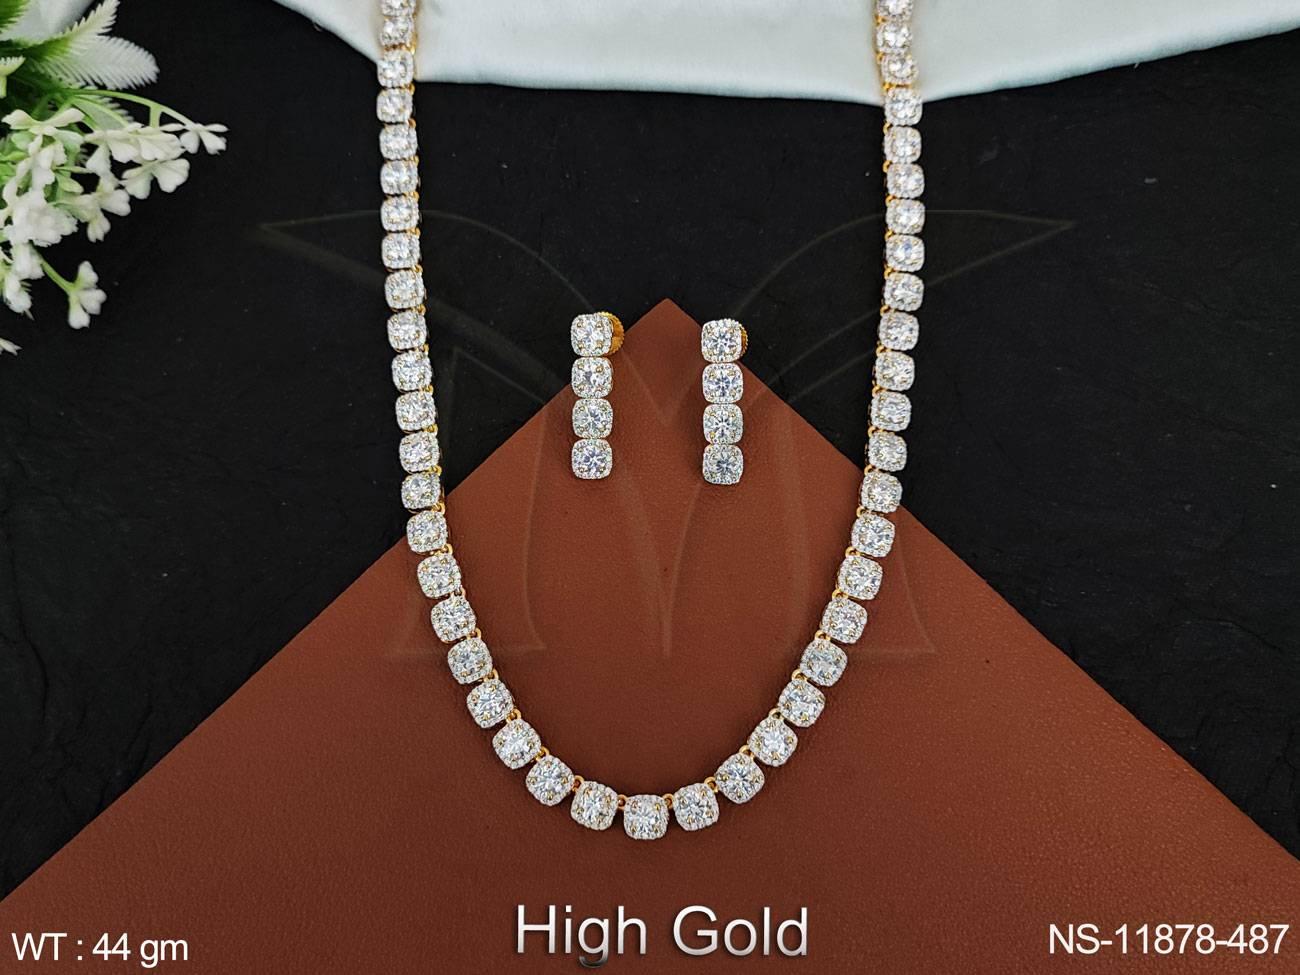 This Designer Fancy Style Party wear High Gold Polish Cz Ad Full Stones American Diamond Necklace Set adds a touch of elegance to any outfit.